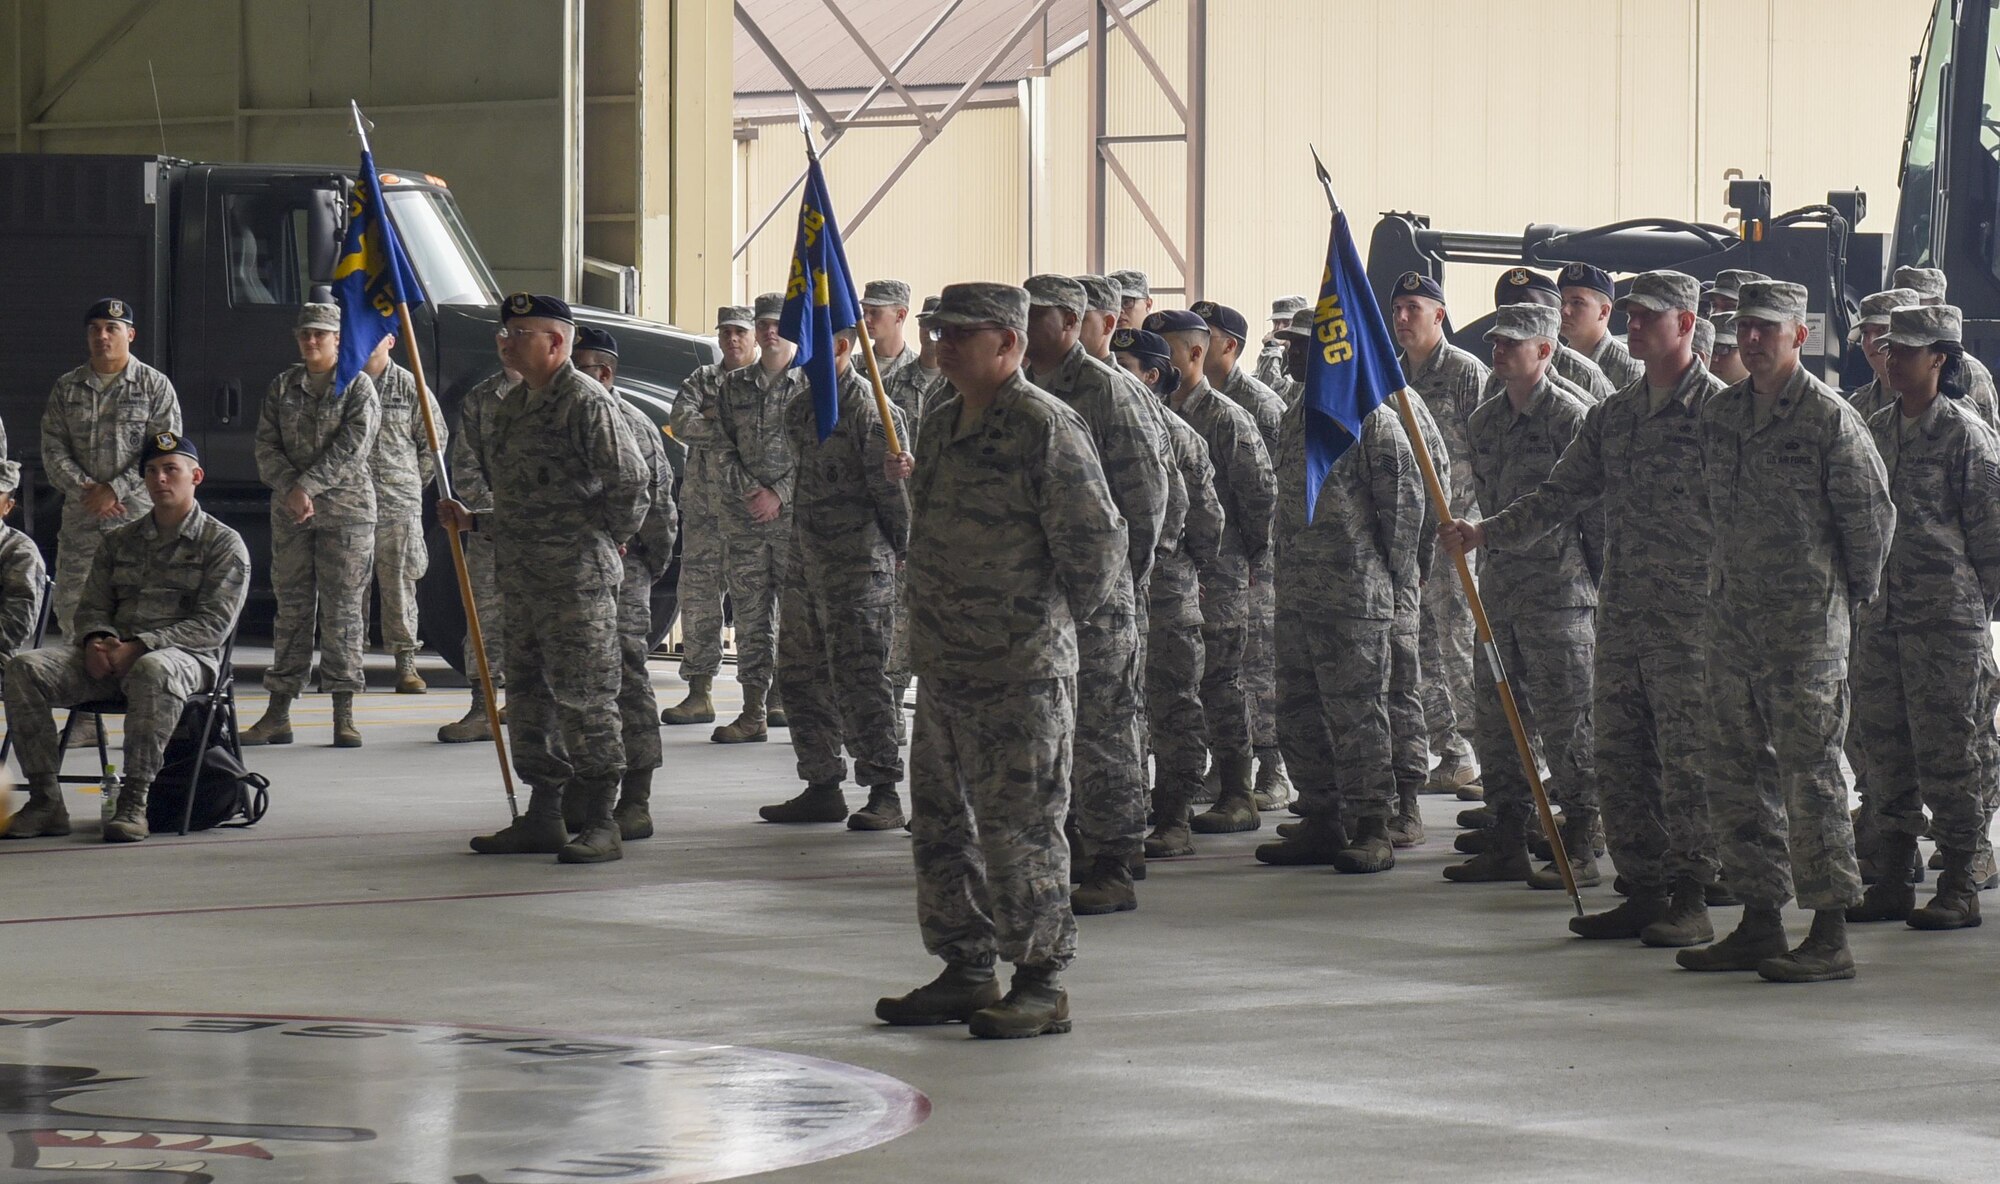 8th Mission Support Group Airmen stand in formation during a change of command ceremony at Kunsan Air Base, Republic of Korea, June 8, 2017. Col. Michael Zuhlsdorf took command of the 8th MSG from Col. Richard McKee during which he received the title of “Falcon”. (U.S. Air Force photo by Senior Airman Michael Hunsaker/Released)